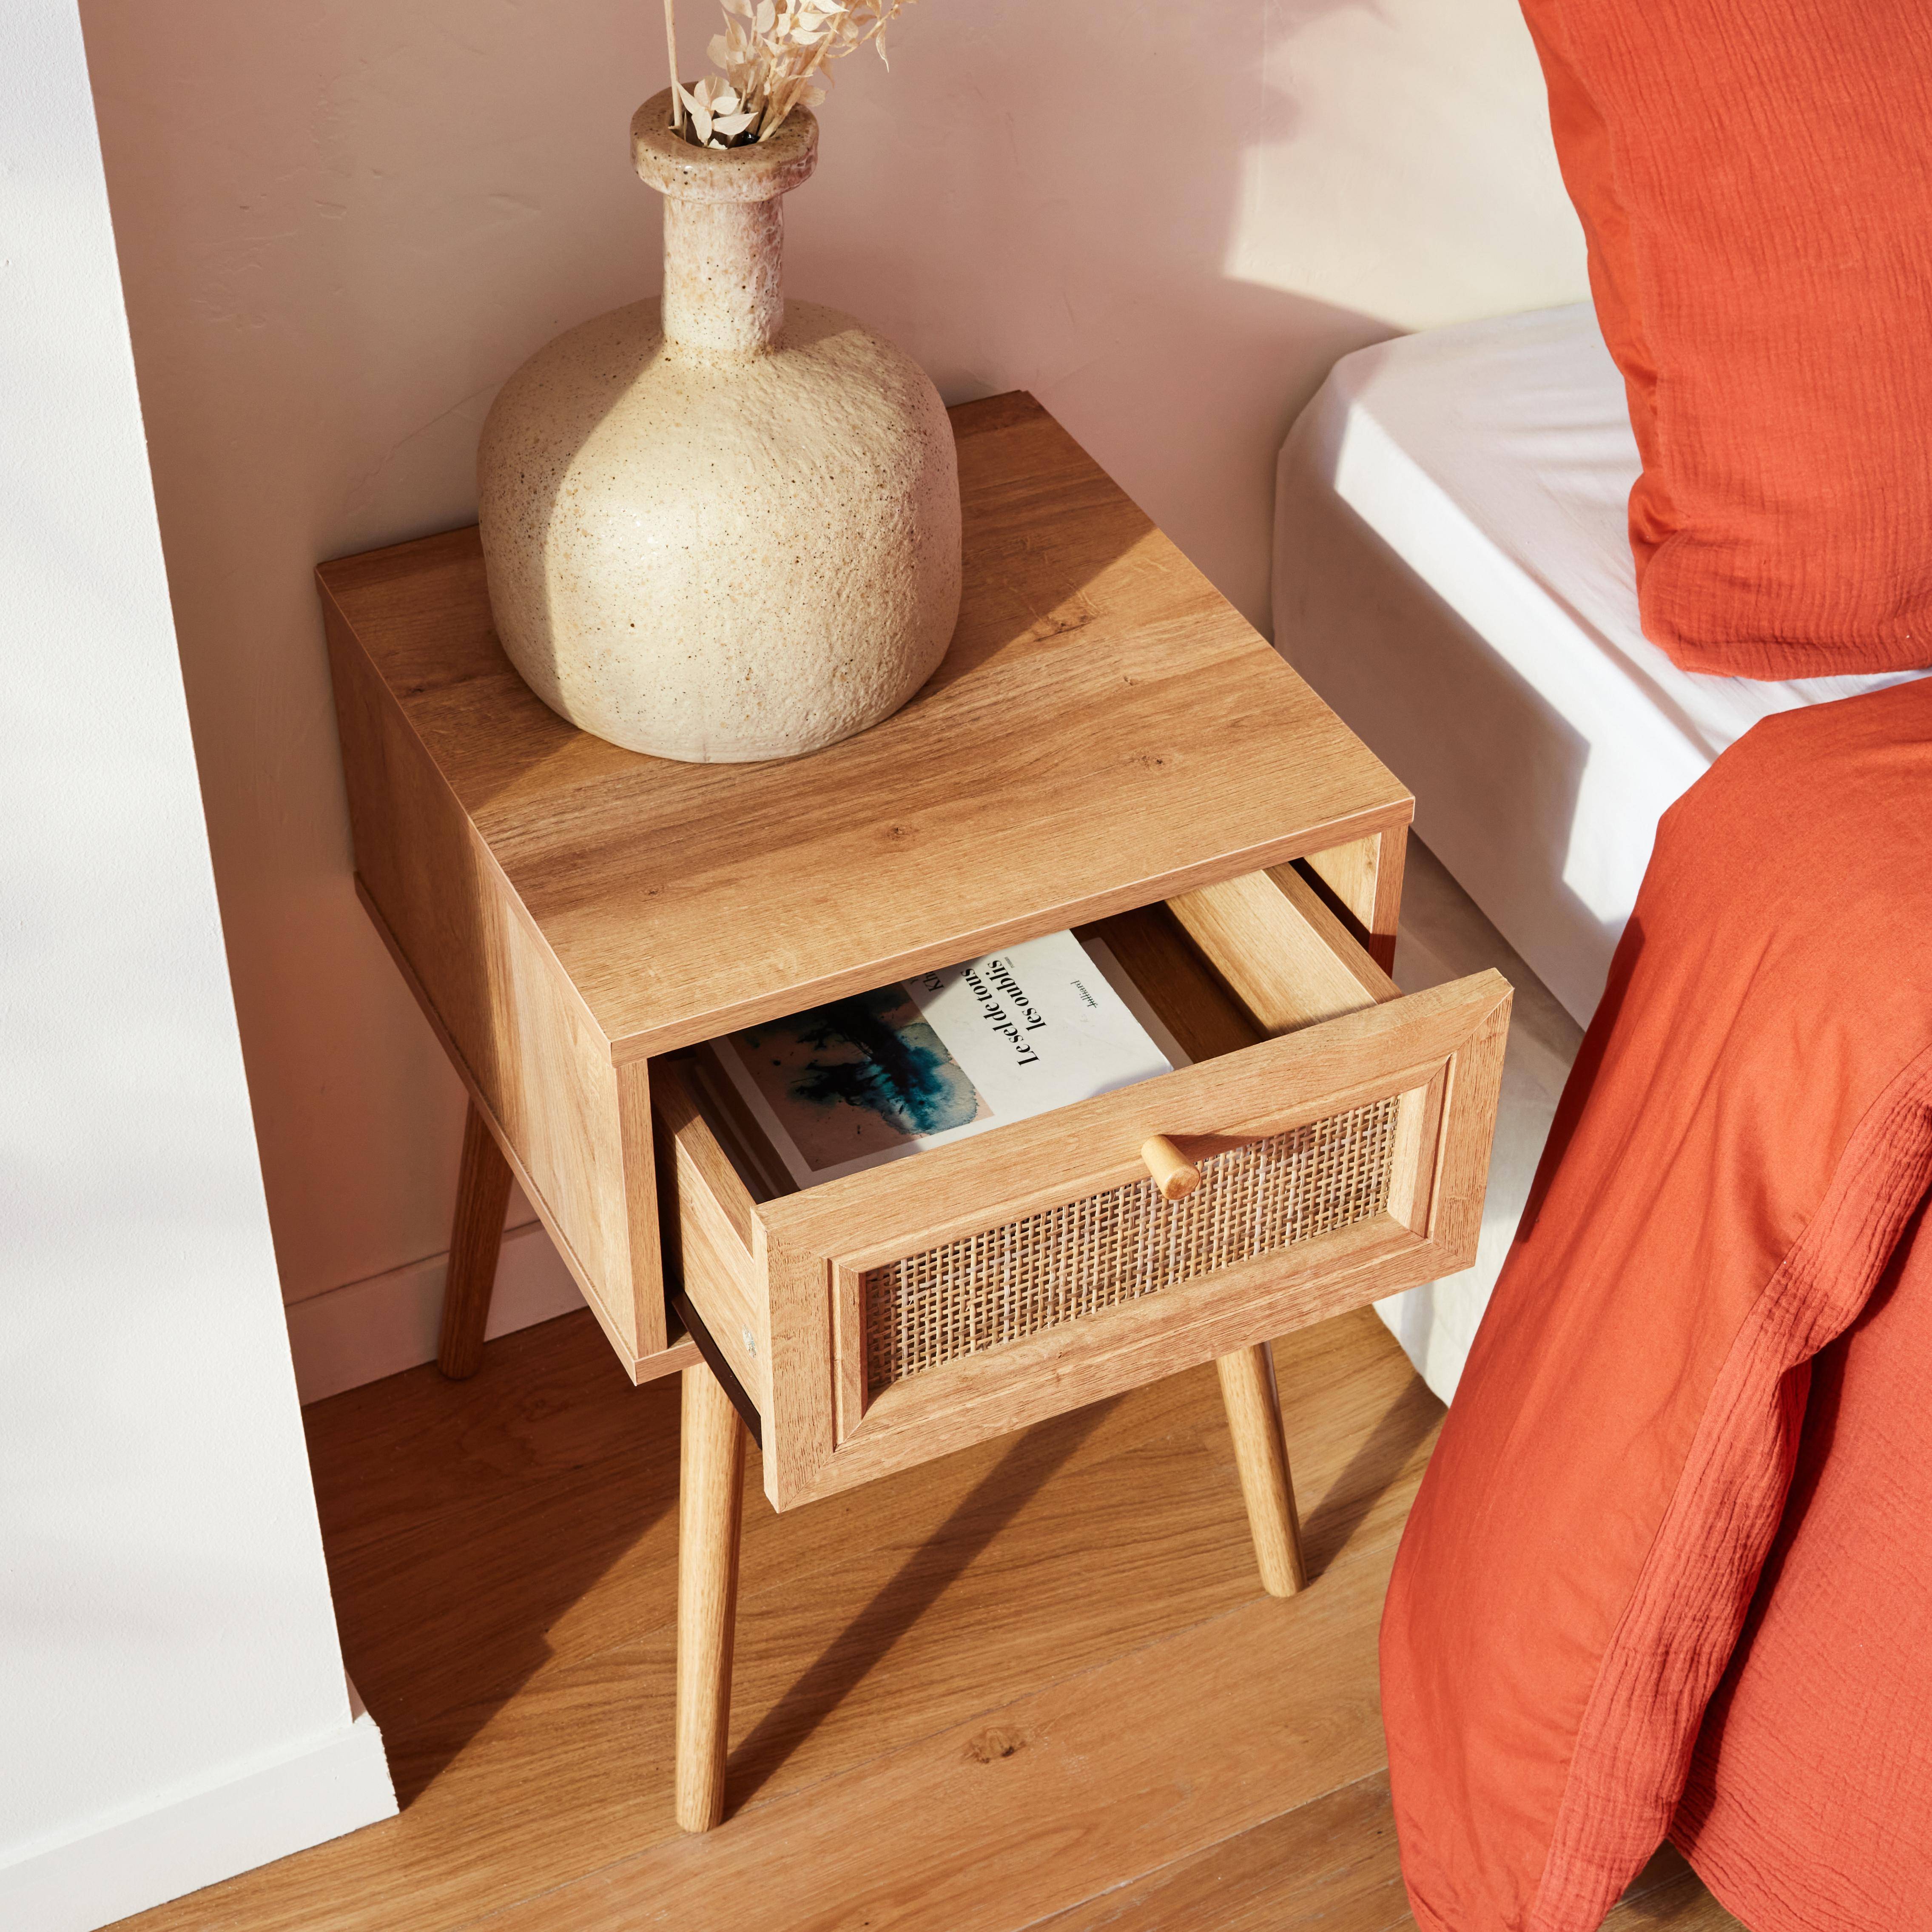 Woven rattan bedside table with drawer, 39x39x55.4cm - Boheme - Natural Wood colour,sweeek,Photo2